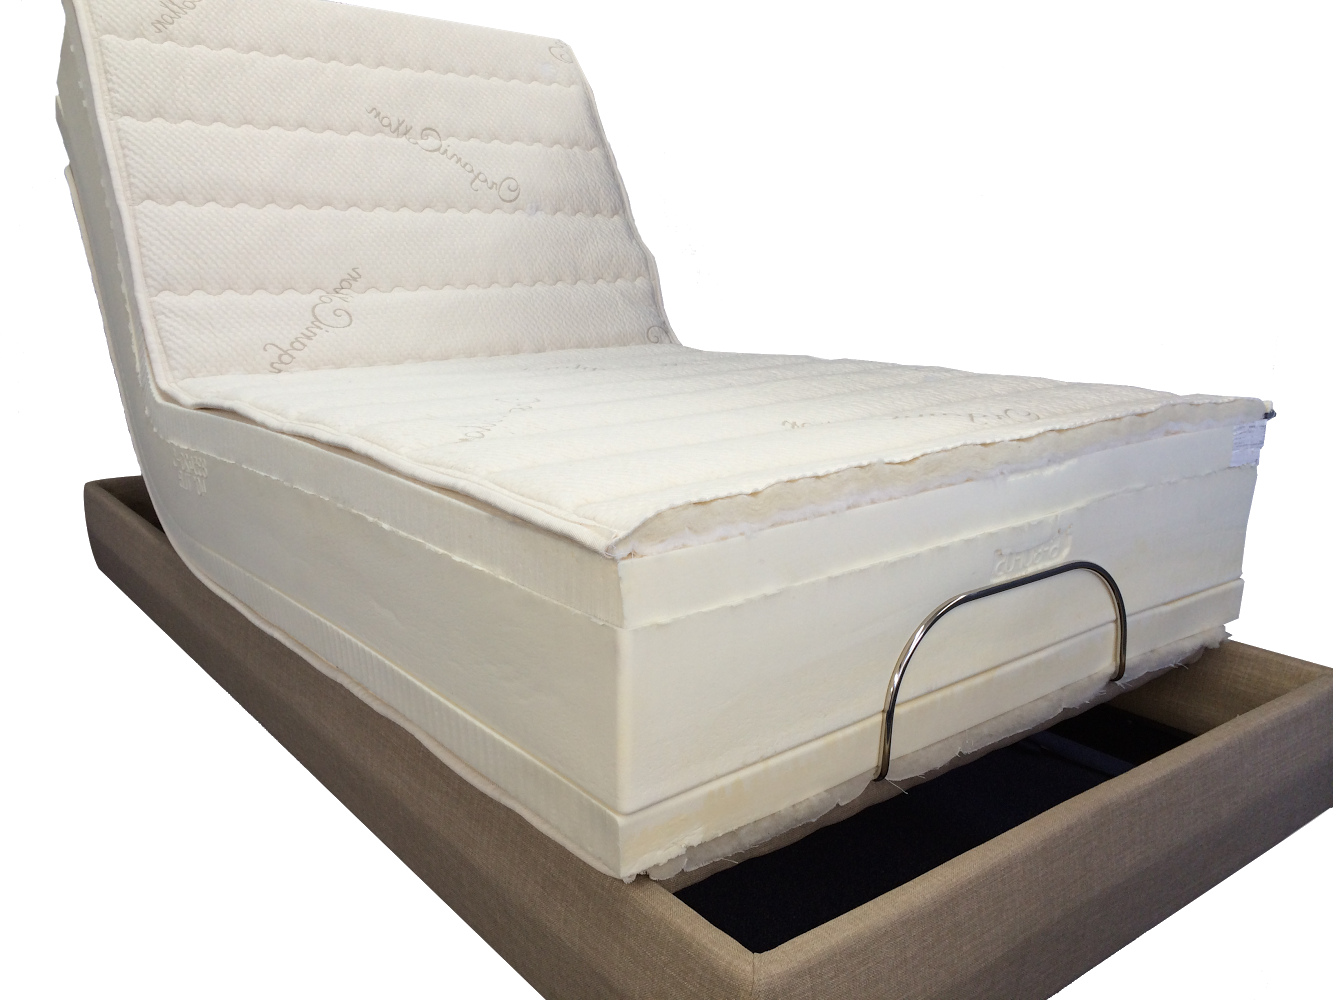 seattle wa best quality highest ratings Adjustable-Beds reviews consumer reports electric adjustablebeds